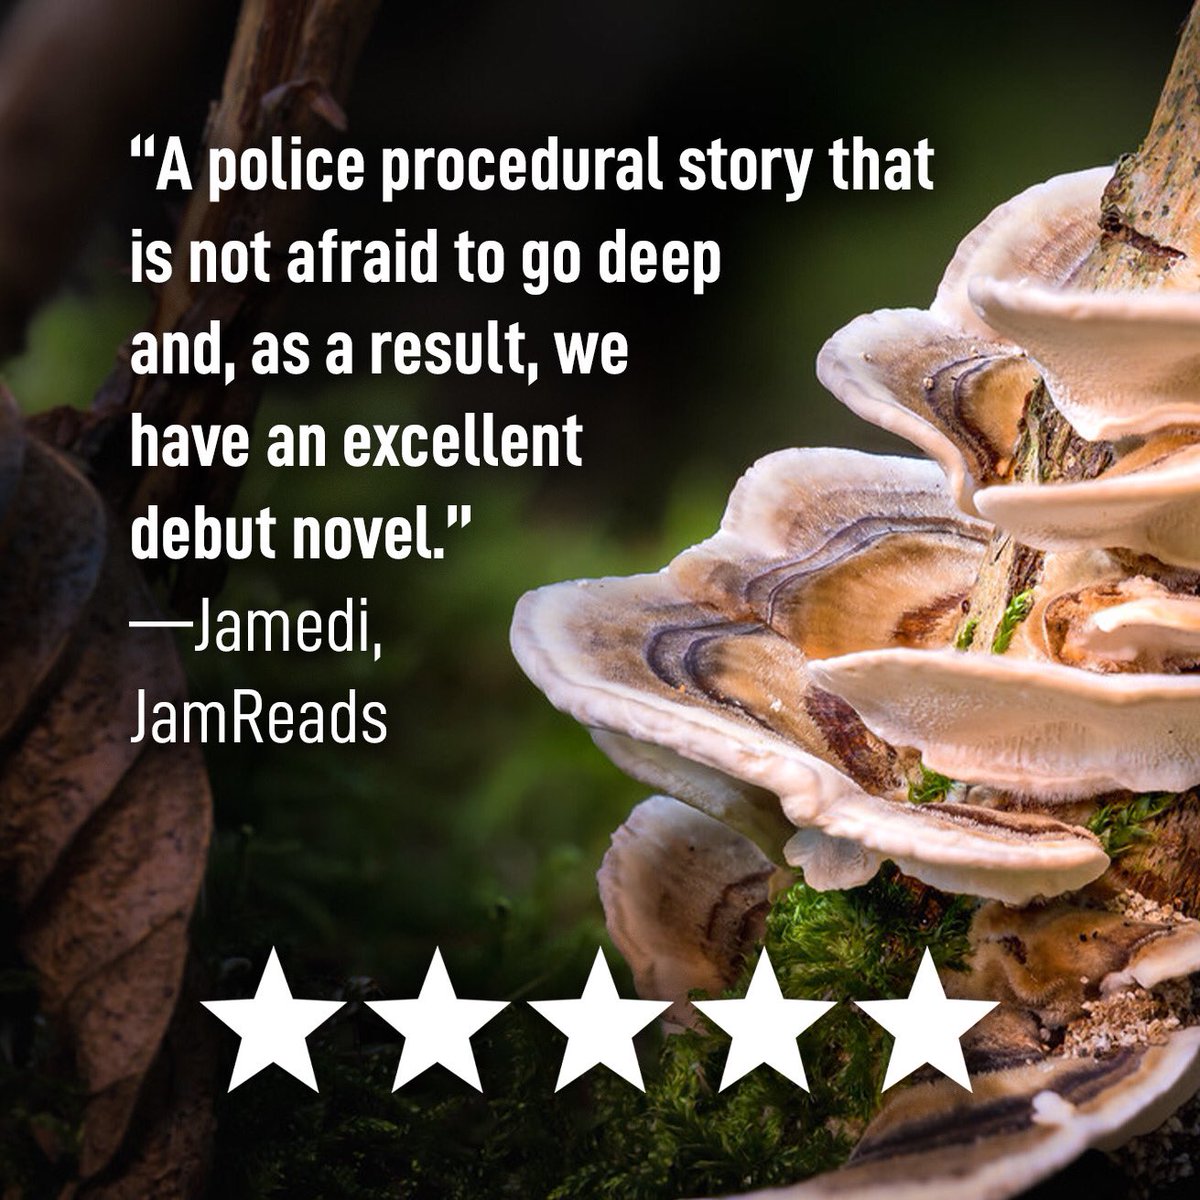 I was so appreciative of @jamediGwent for helping with the #MushroomBlues cover reveal, but then he dropped this 5-star review after launch, too! Gracias, amigo 🍄 BUY A COPY: Paperback: amzn.to/3VoOBNF Hardcover: amzn.to/3vs5nAO eBook/KU: a.co/d/fIKaQ9q